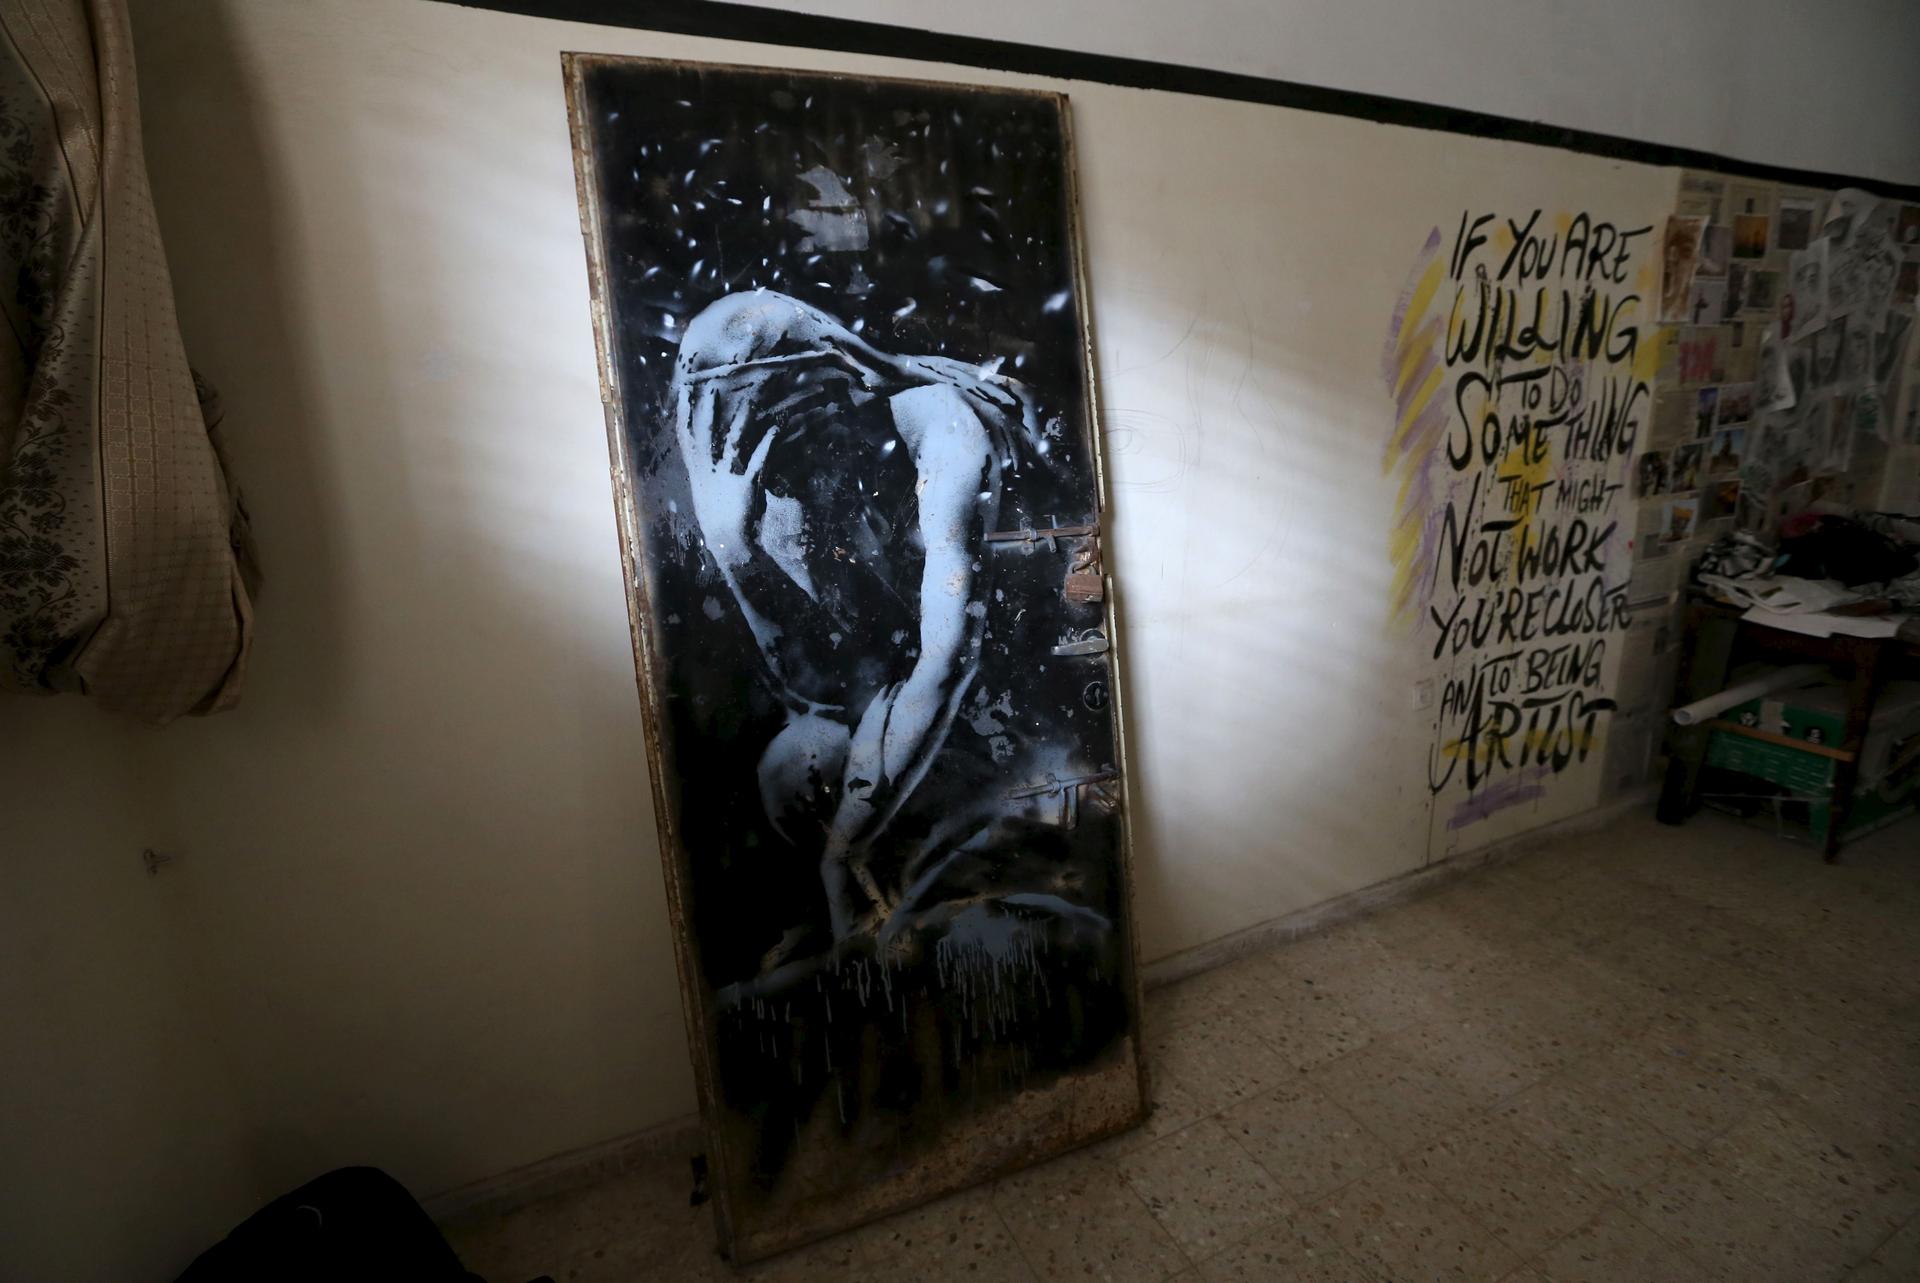 The door of a destroyed house, painted by British street artist Banksy, is seen here inside the gallery of a local Palestinian artist.